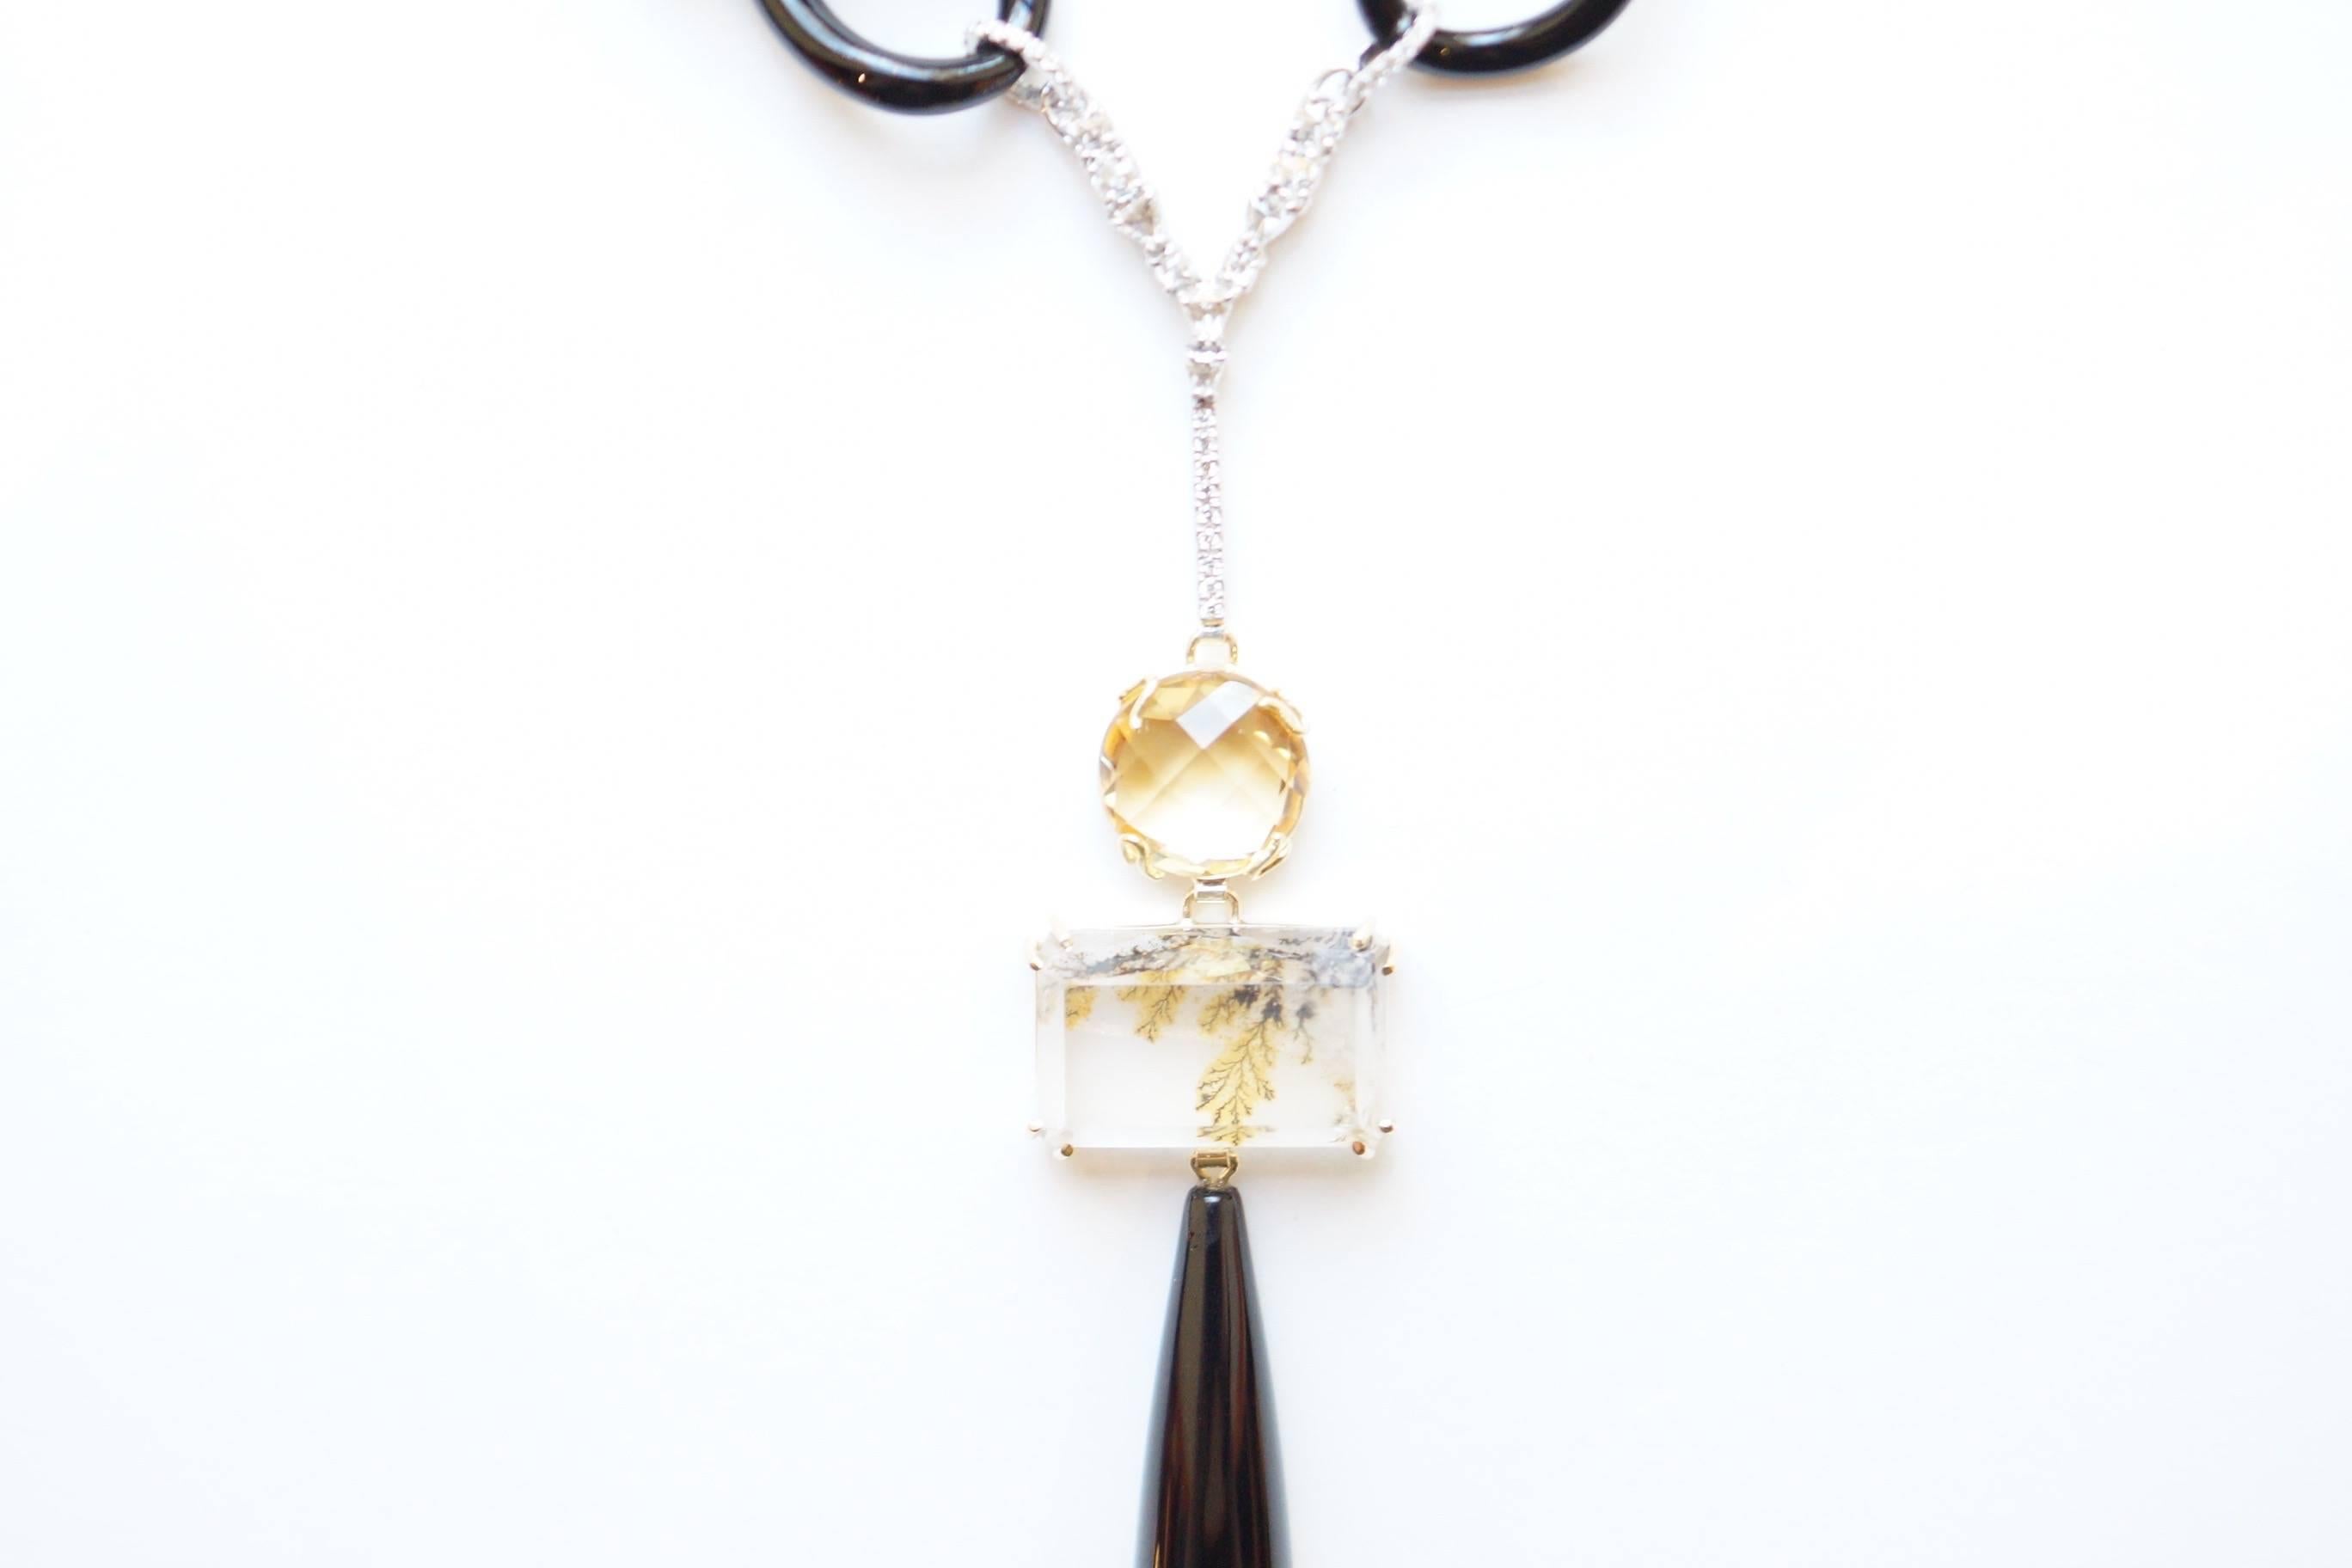 Bumble Necklace
A platinum and eighteen-karat yellow gold necklace, uniting an edgy grouping of black onyx, citrine, dendritic quartz and black quartz.  This necklace begins with a double eighteen-karat white gold chain that loops into links carved